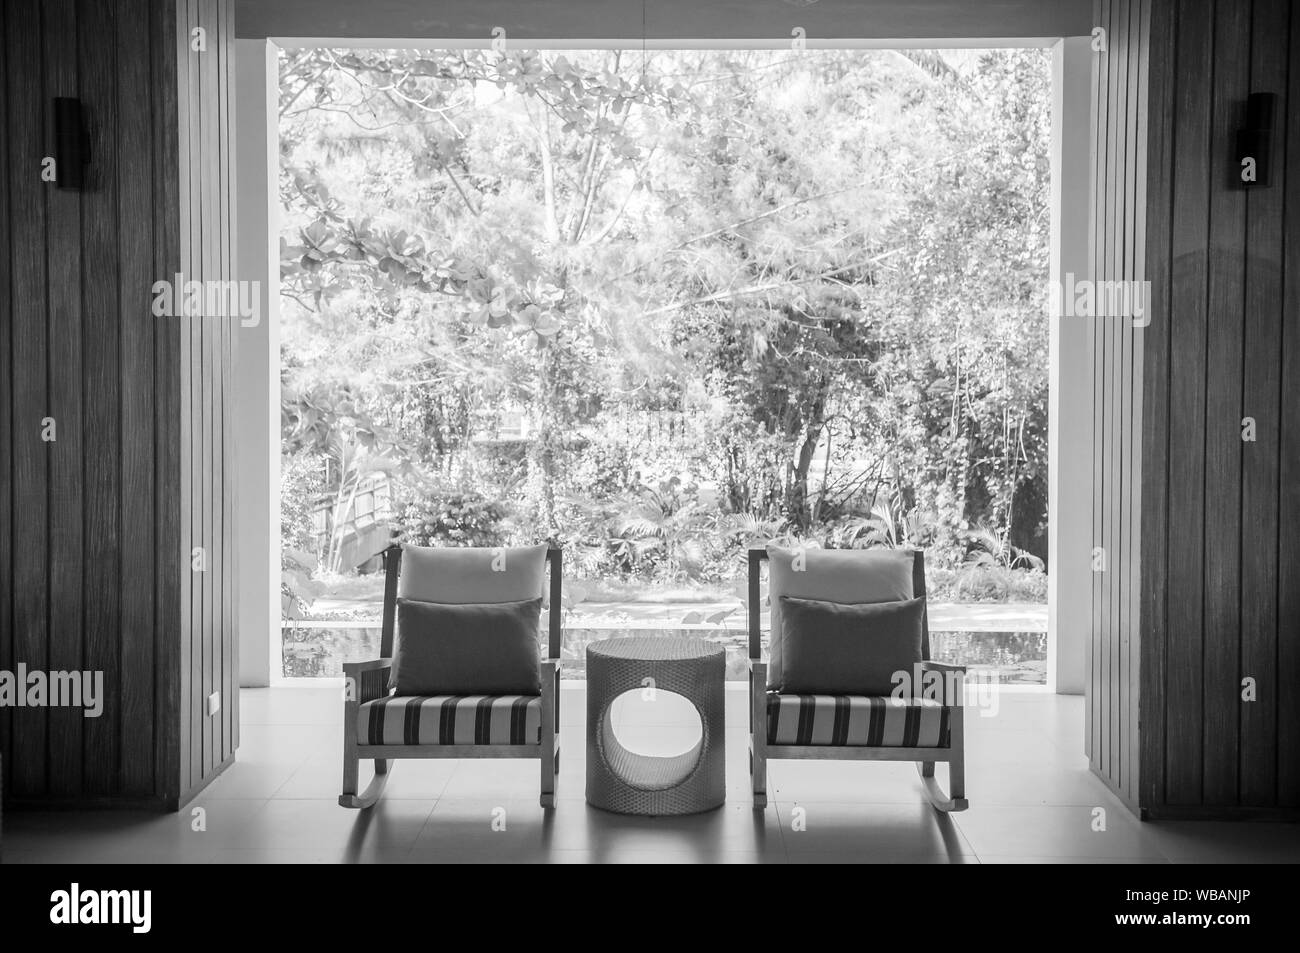 MAY 21, 2014 Krabi, THAILAND - Modern contemporary style rocking chairs with table garden view, pillows and minimal decoration. Black and white Stock Photo